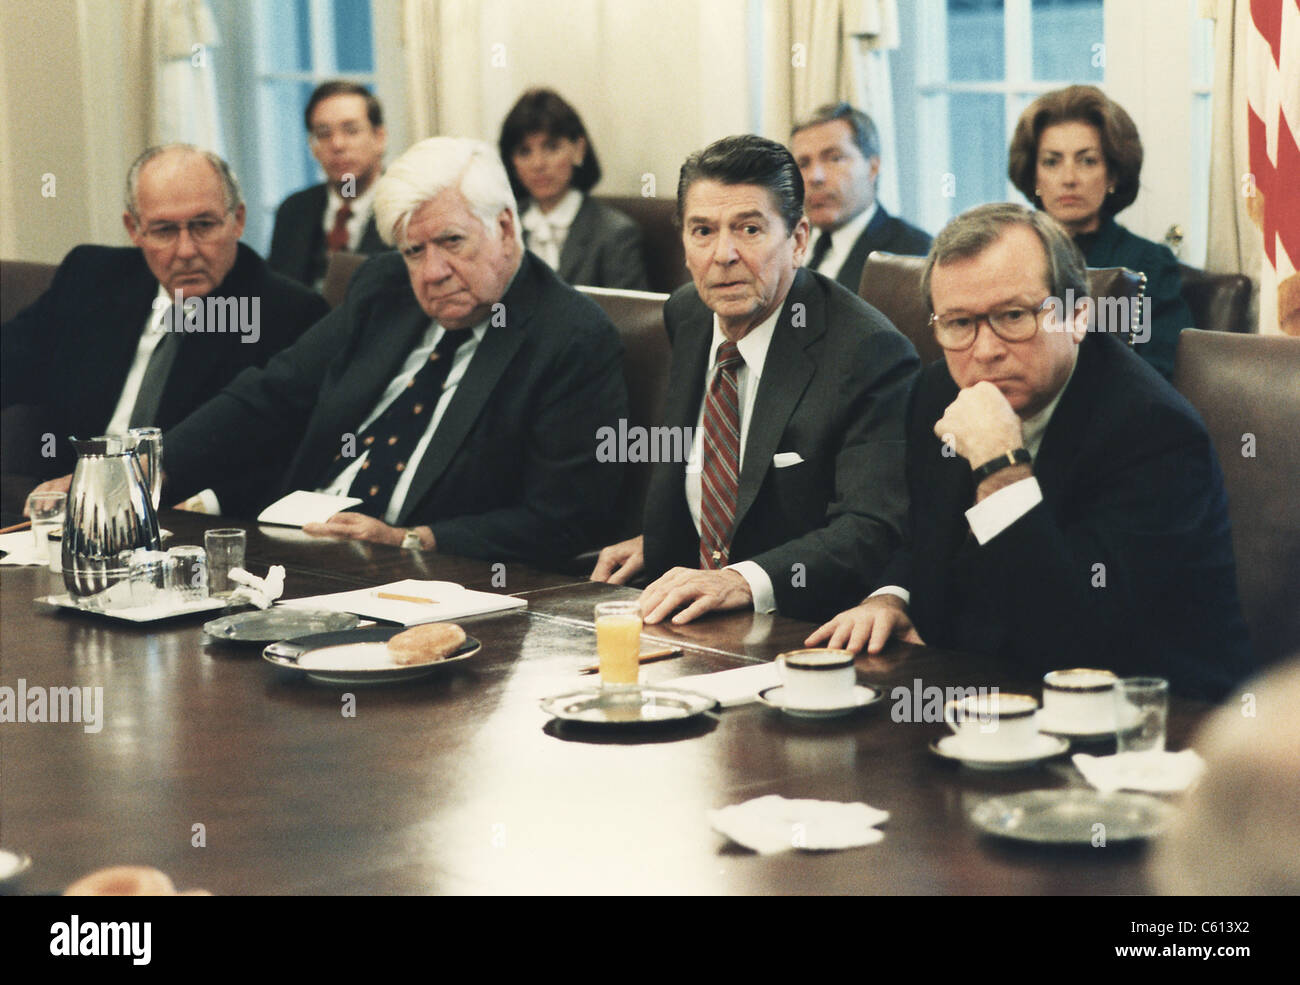 President Reagan meeting with Congress after the invasion of Grenada in the Cabinet Room. Reagan is flanked by Speaker of the House Tip O'Neill left and Senate Majority Leader Howard Baker. Oct. 25 1983 (BSLOC 2011 2 3) Stock Photo